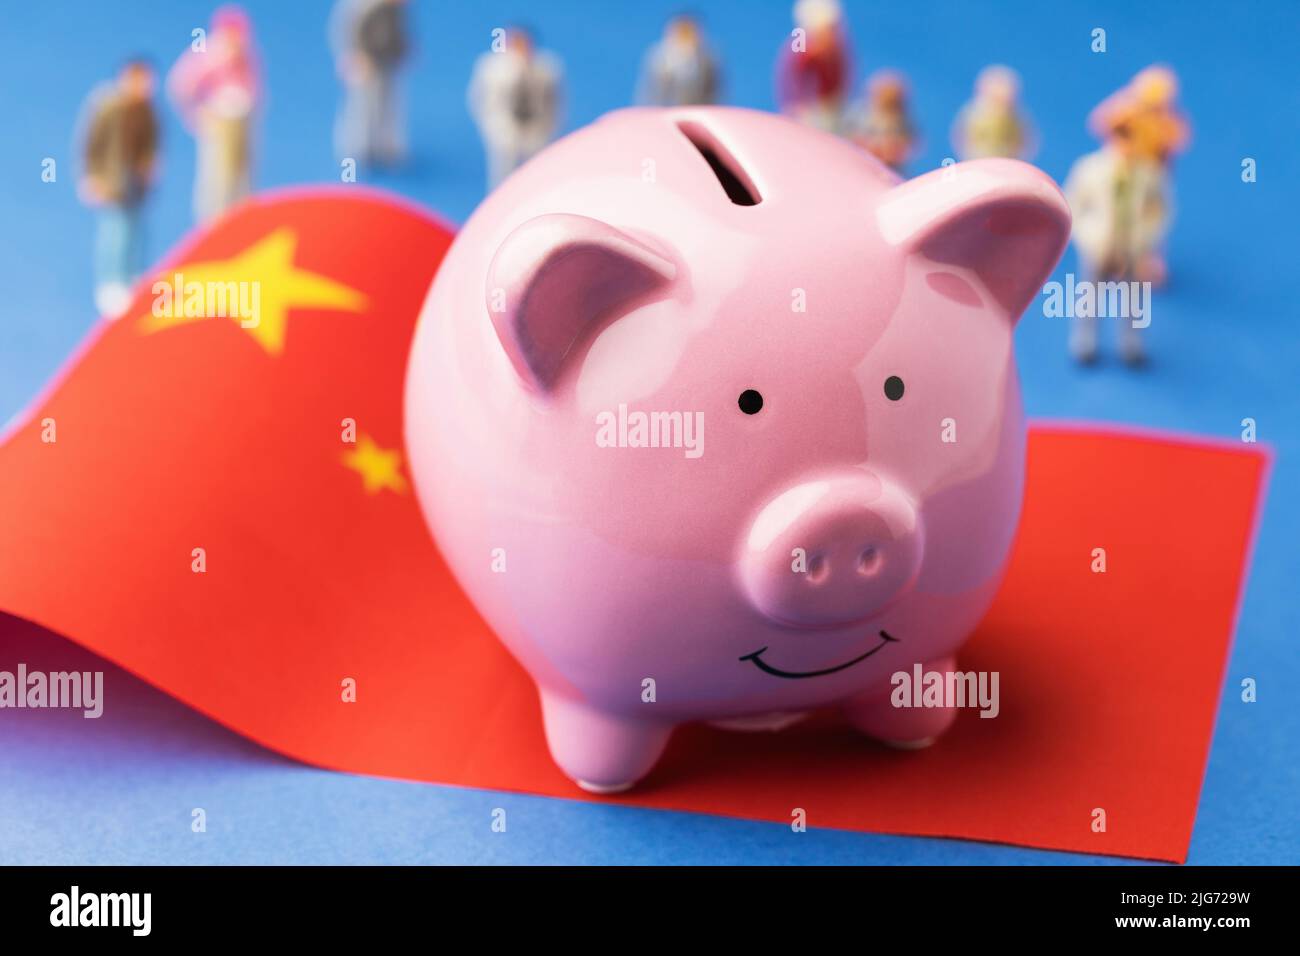 Piggy bank, Chinese flag and plastic toy people on a colored background, a concept on the topic of income in China Stock Photo